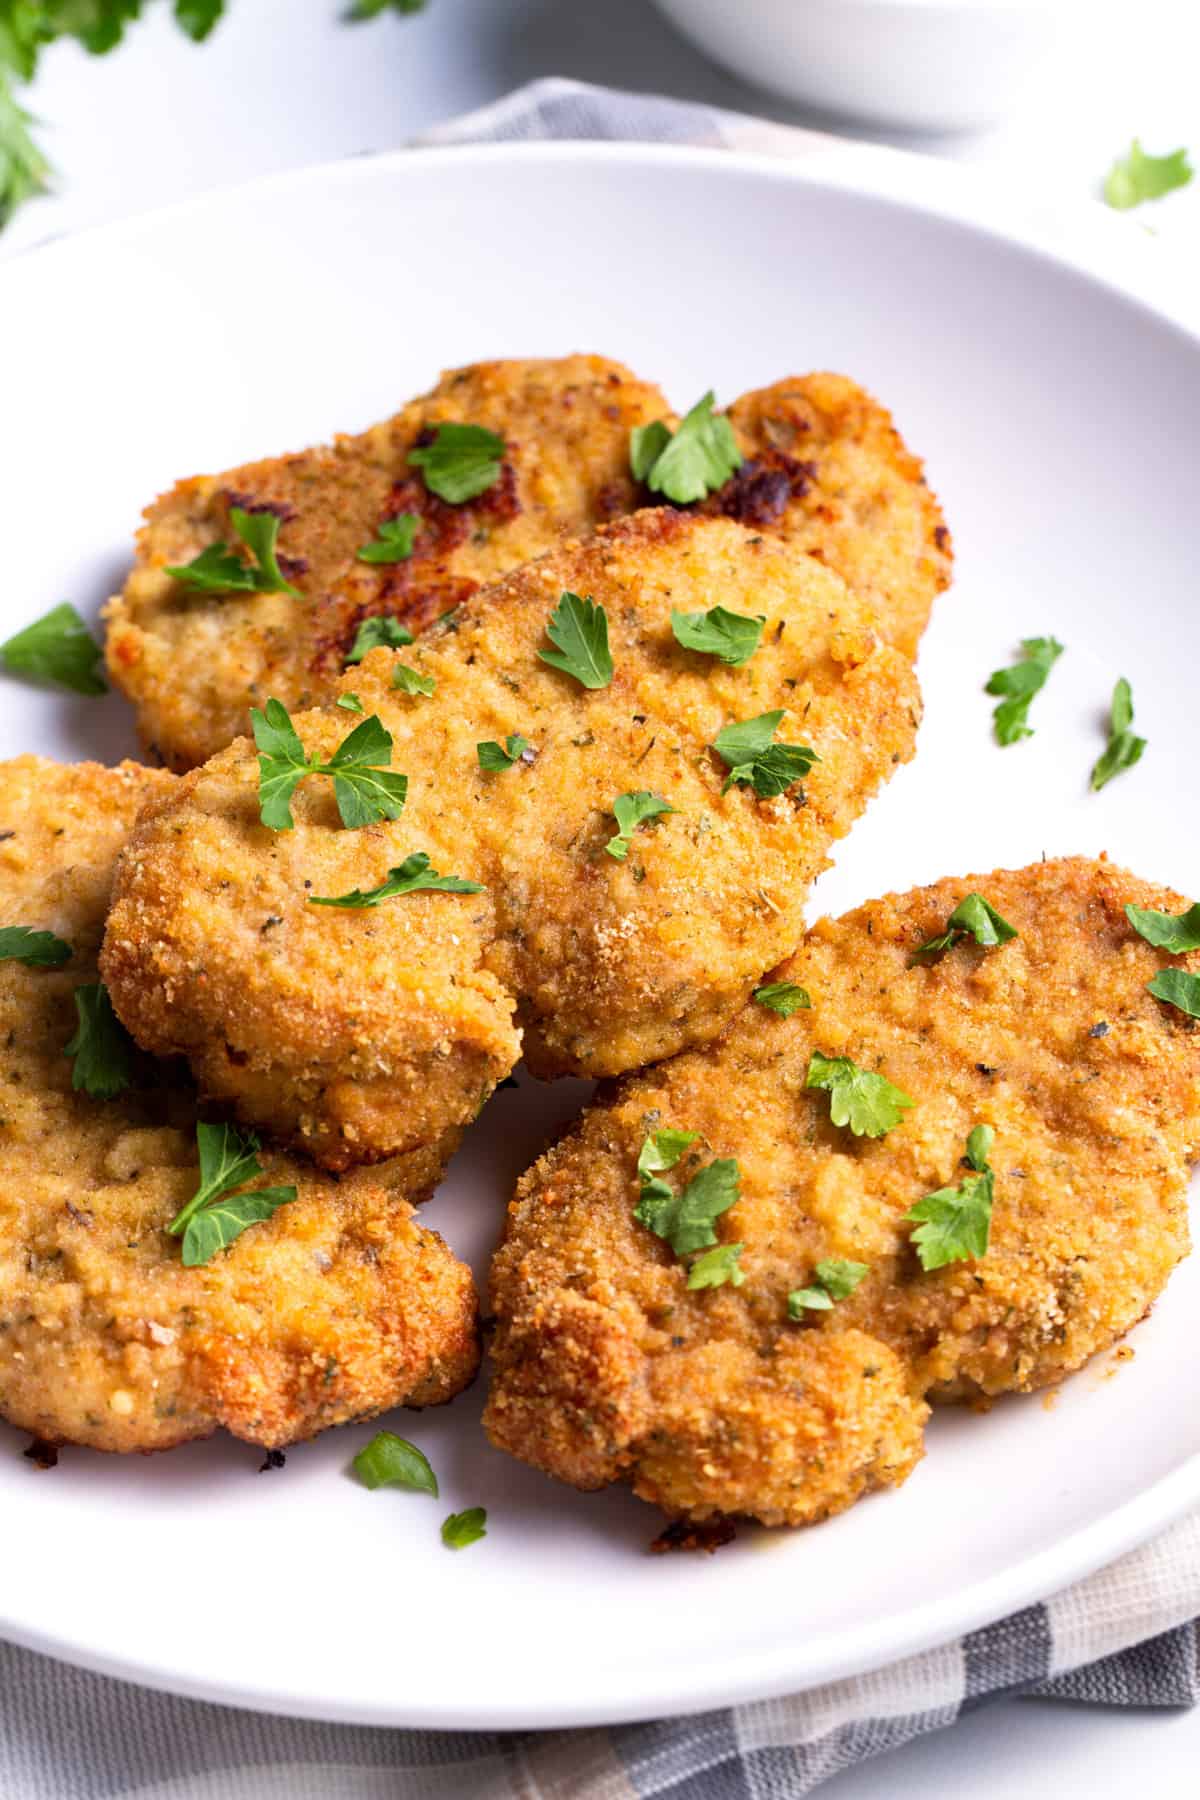 close up image of a plate of baked breaded pork chops garnished with fresh parsley